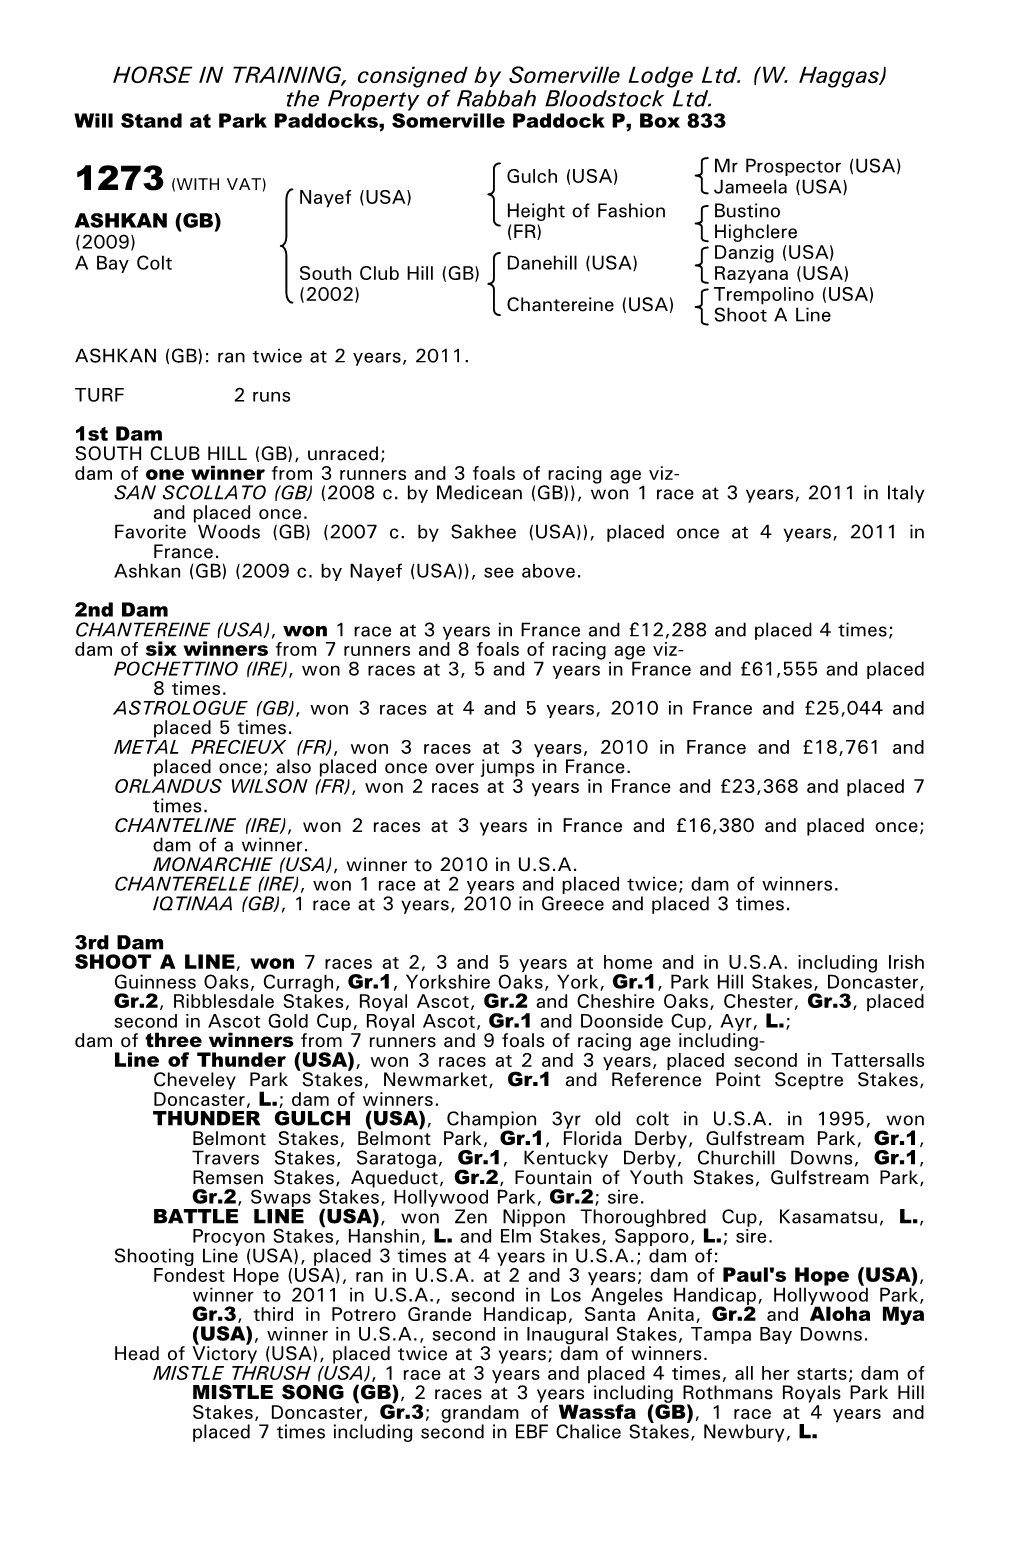 HORSE in TRAINING, Consigned by Somerville Lodge Ltd. (W. Haggas) the Property of Rabbah Bloodstock Ltd